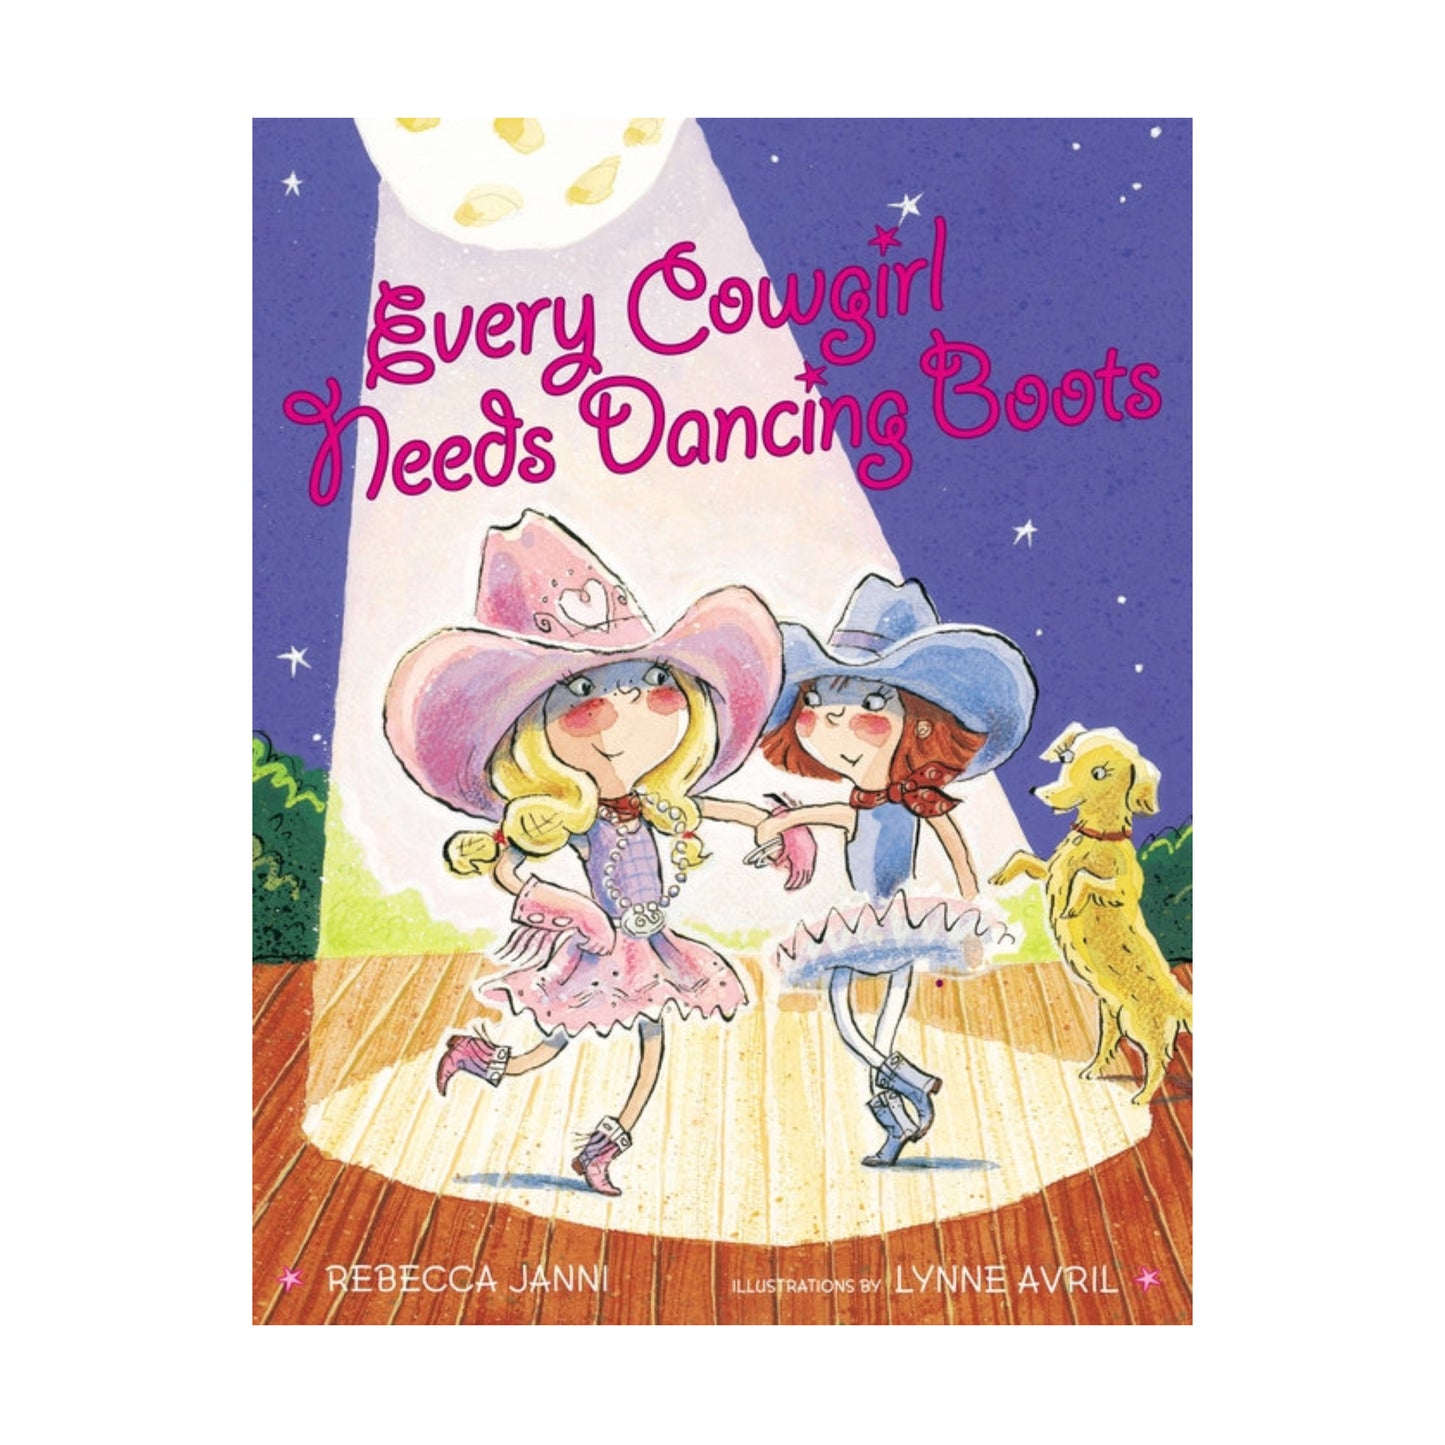 Every Cowgirl Needs Dancing Boots by Rebecca Janni